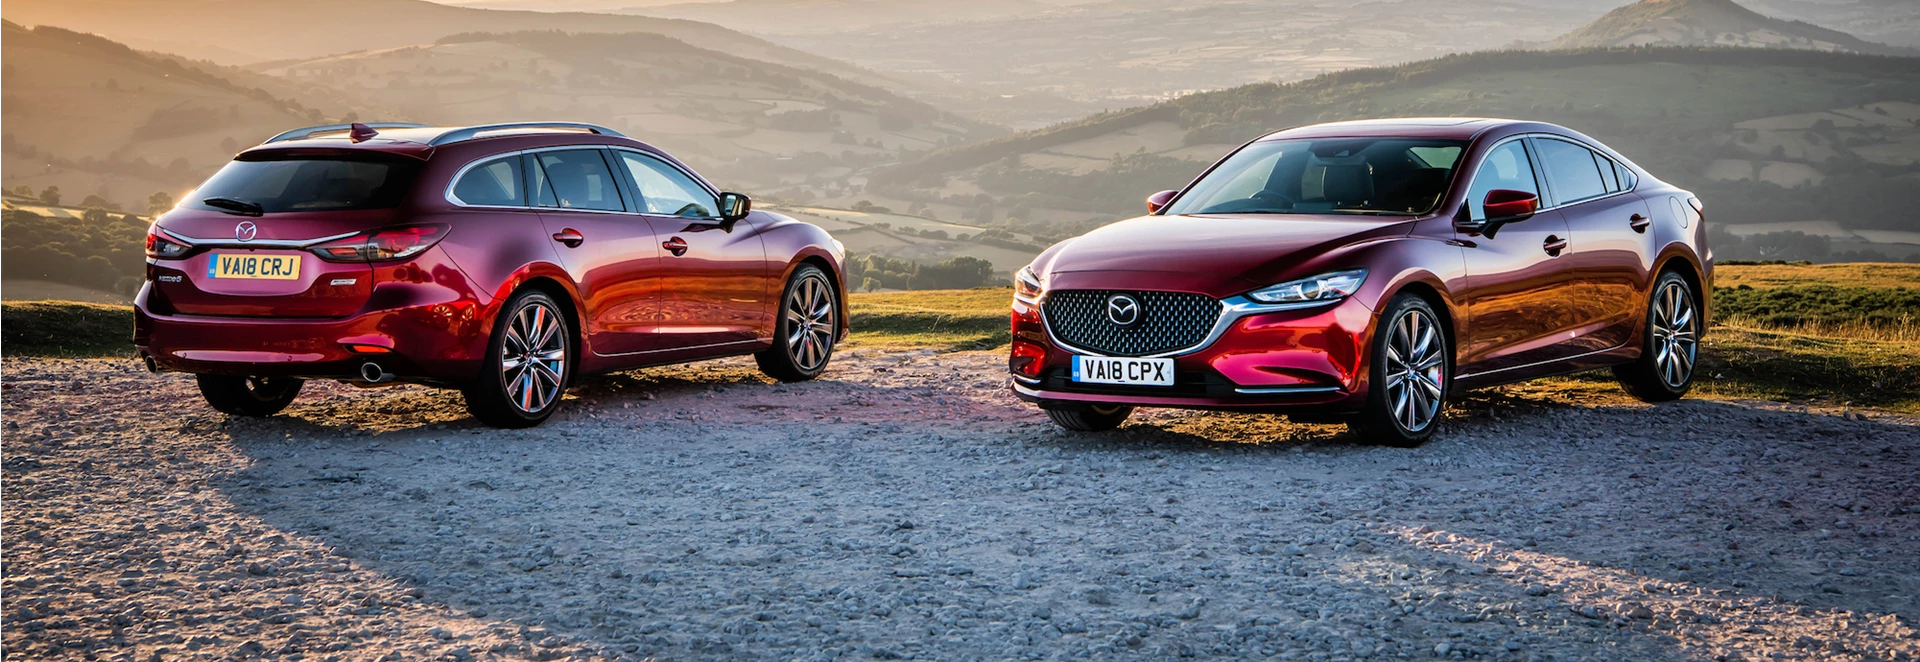 5 Things you need to know about the 2018 Mazda6